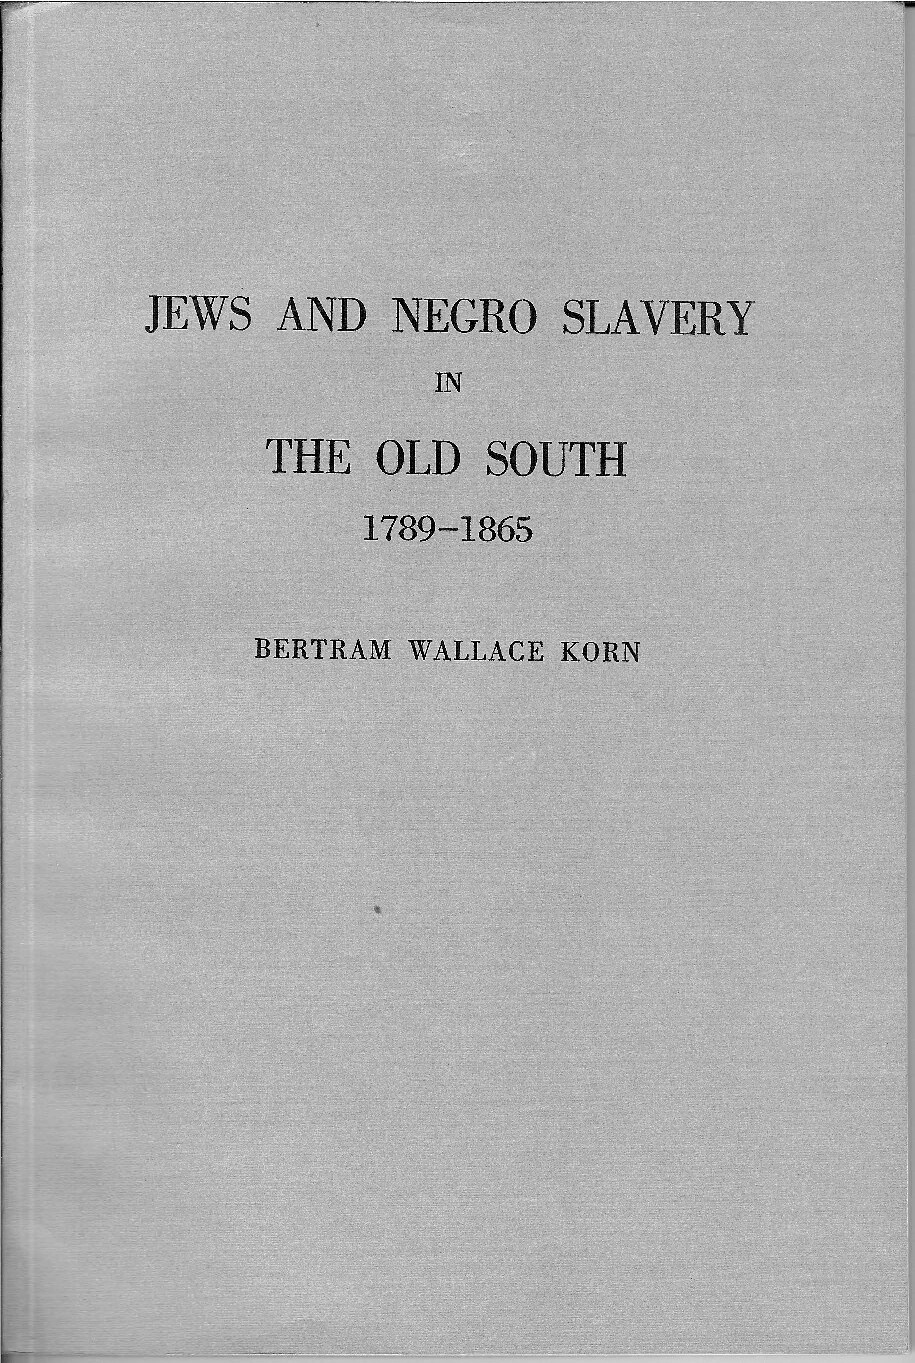 Korn, Bertram Wallace; Jews and Negro Slavery in the Old South - 1789-1865